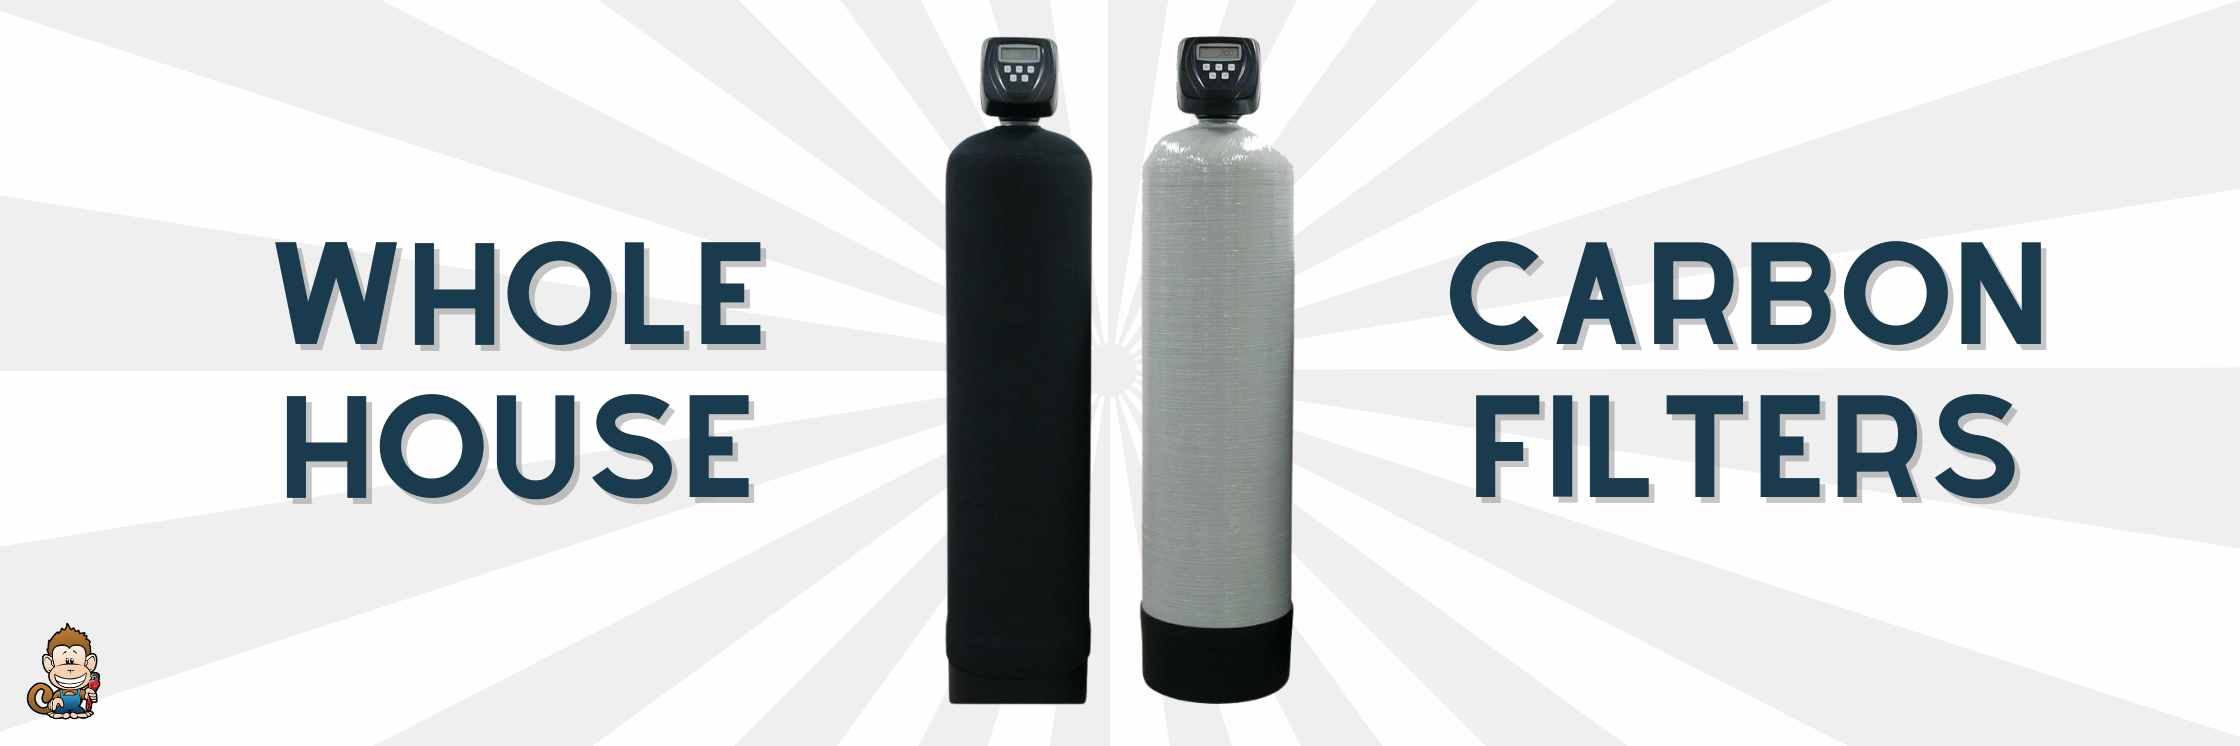 Whole-House Carbon Water Filters: How to Get Rid of Water Contaminants